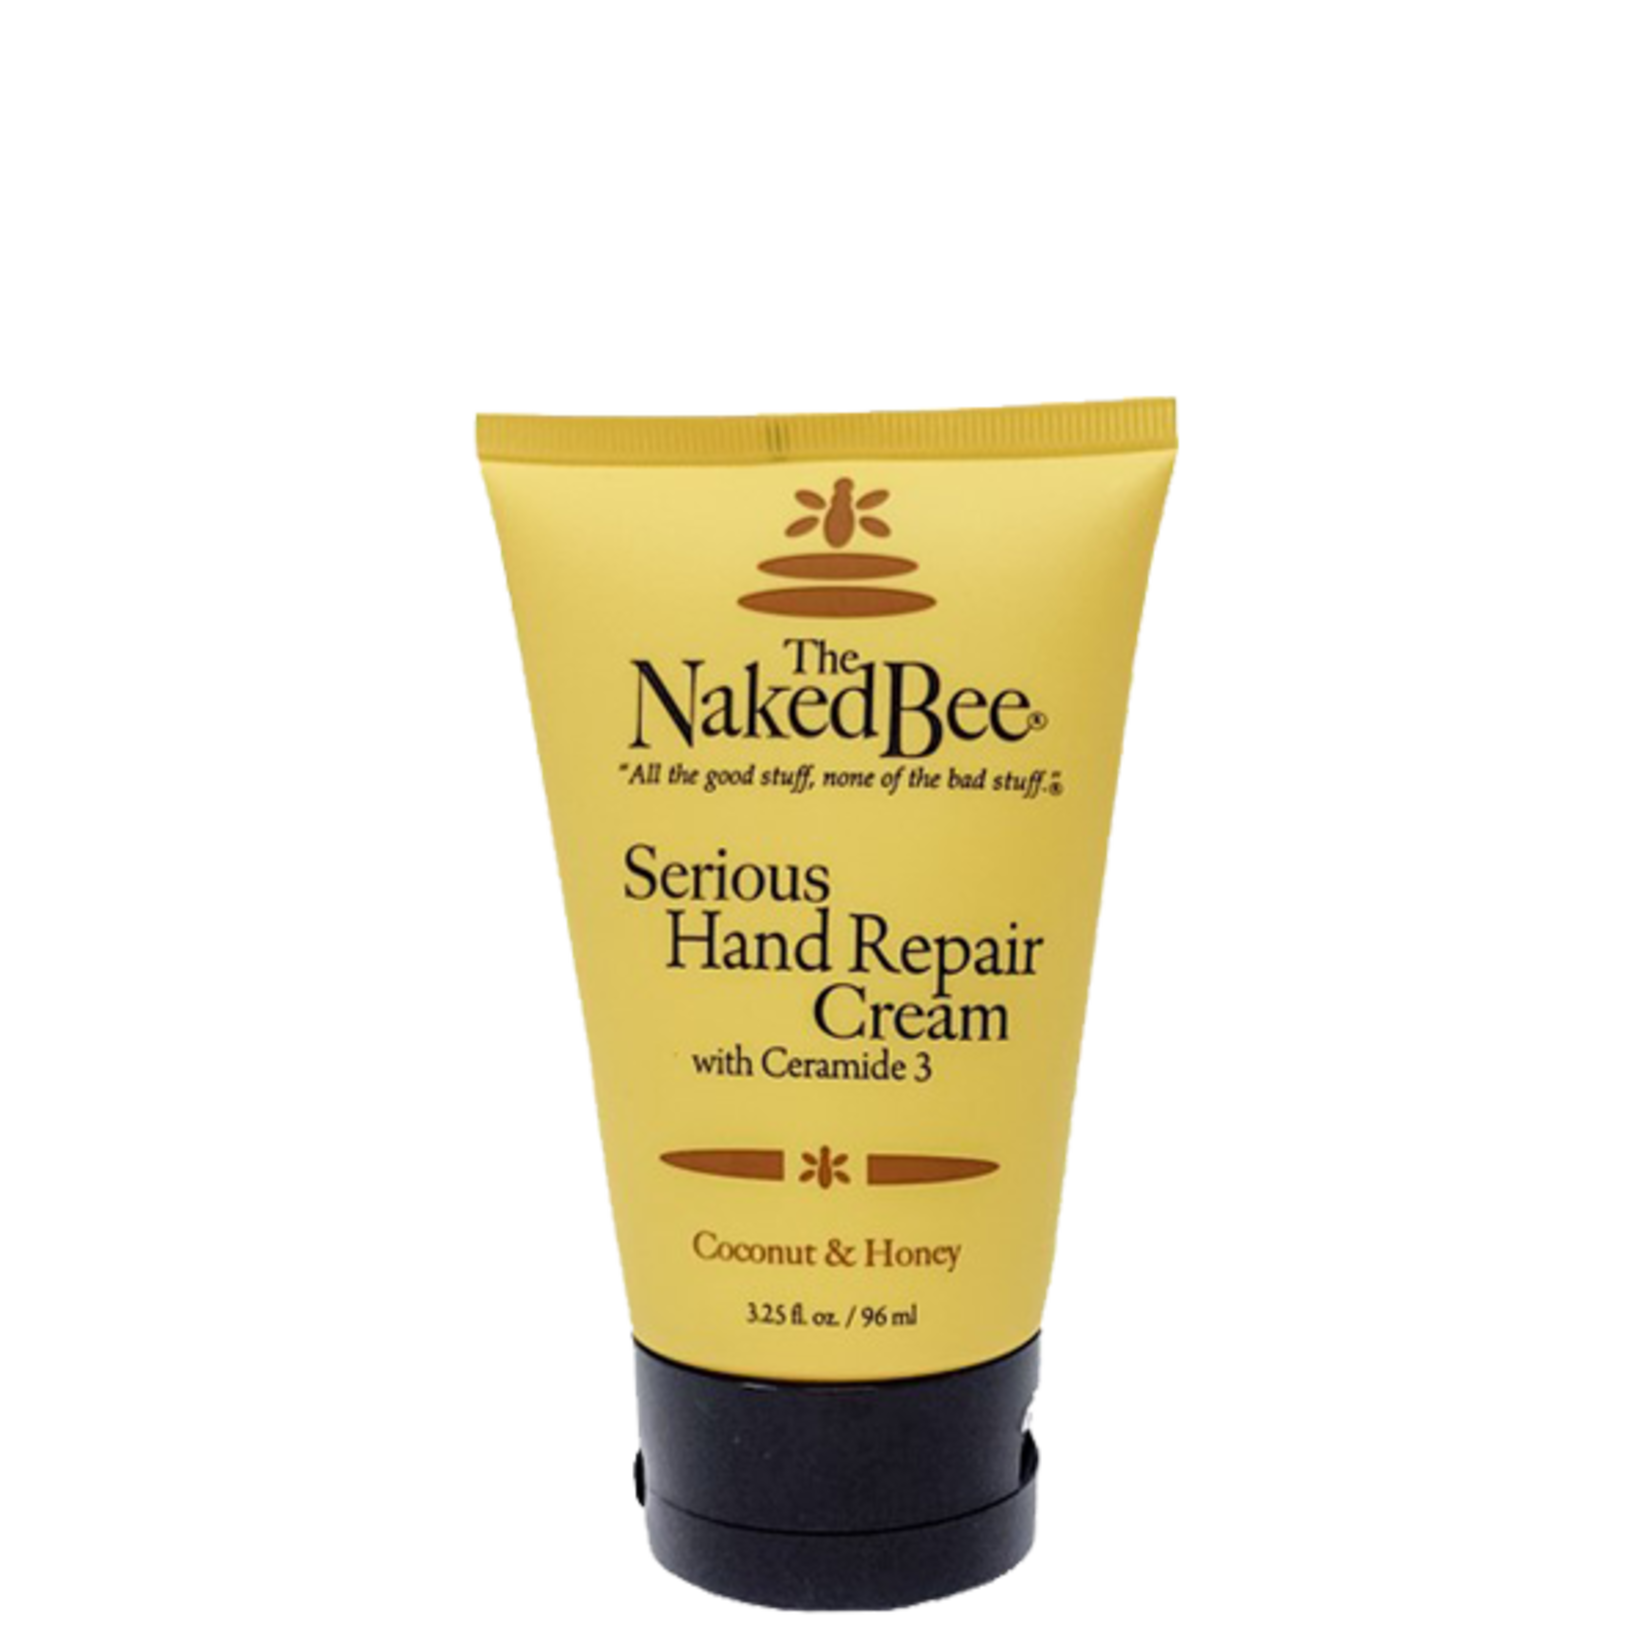 The Naked Bee The Naked Bee Serious Hand Repair Cream